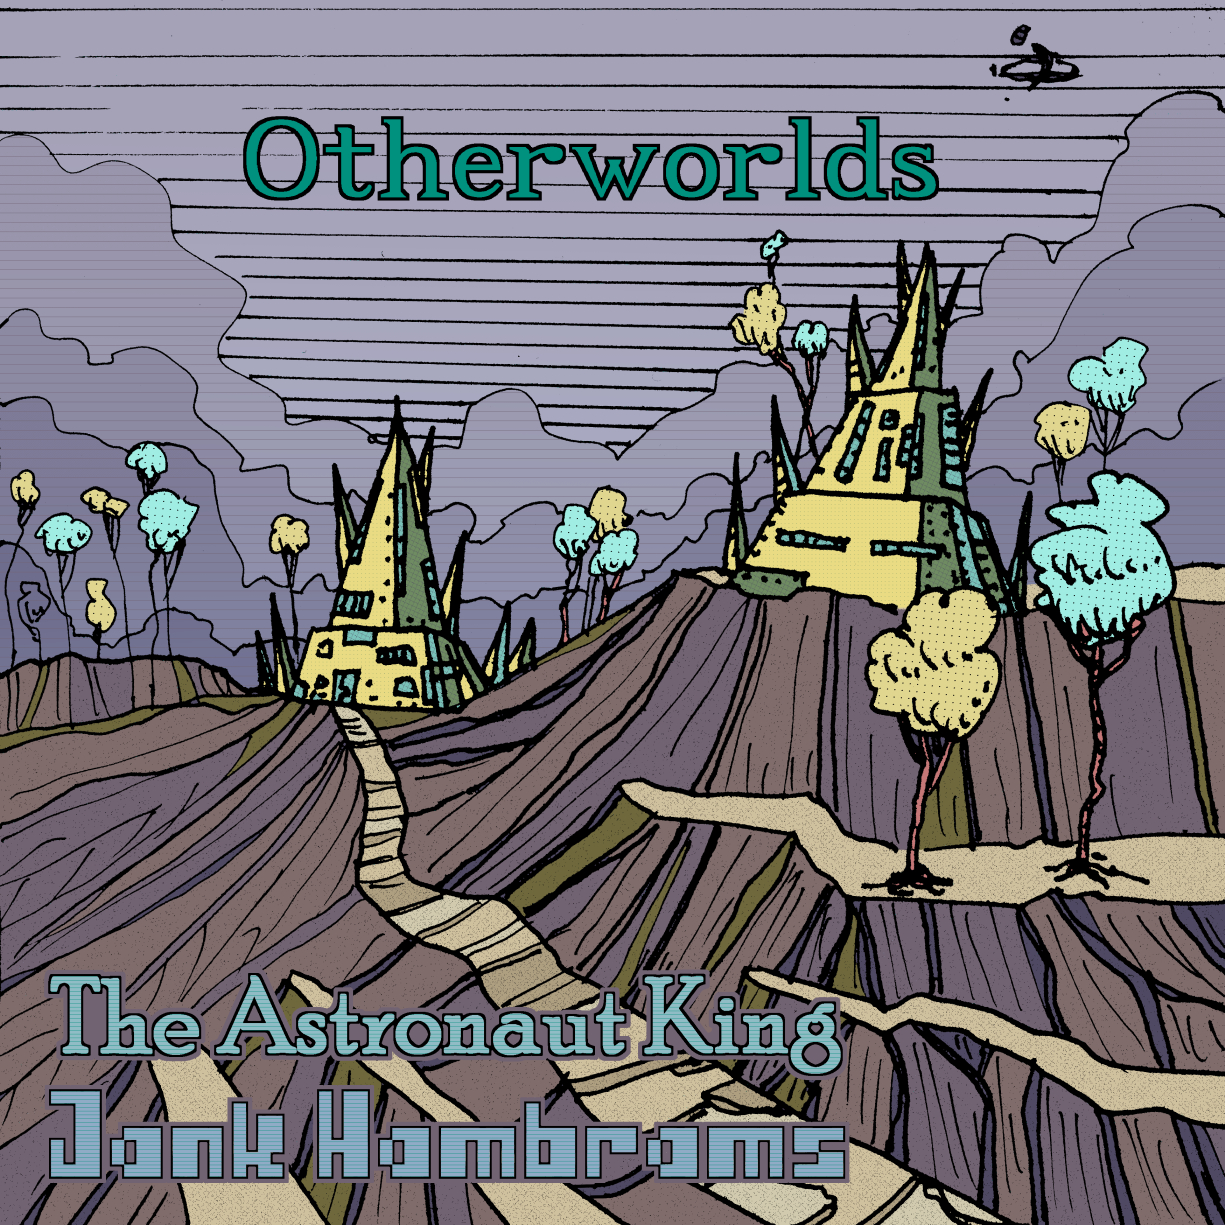 Album art for an album called Otherworlds, by The Astronaut King and Jank Hambrams. It portrays a mountainous landscape with two spiky, scrap metal bunkers. There are small plateaus, fluffy yellow and turquoise trees, and a path leading toward a bunker in the distance.